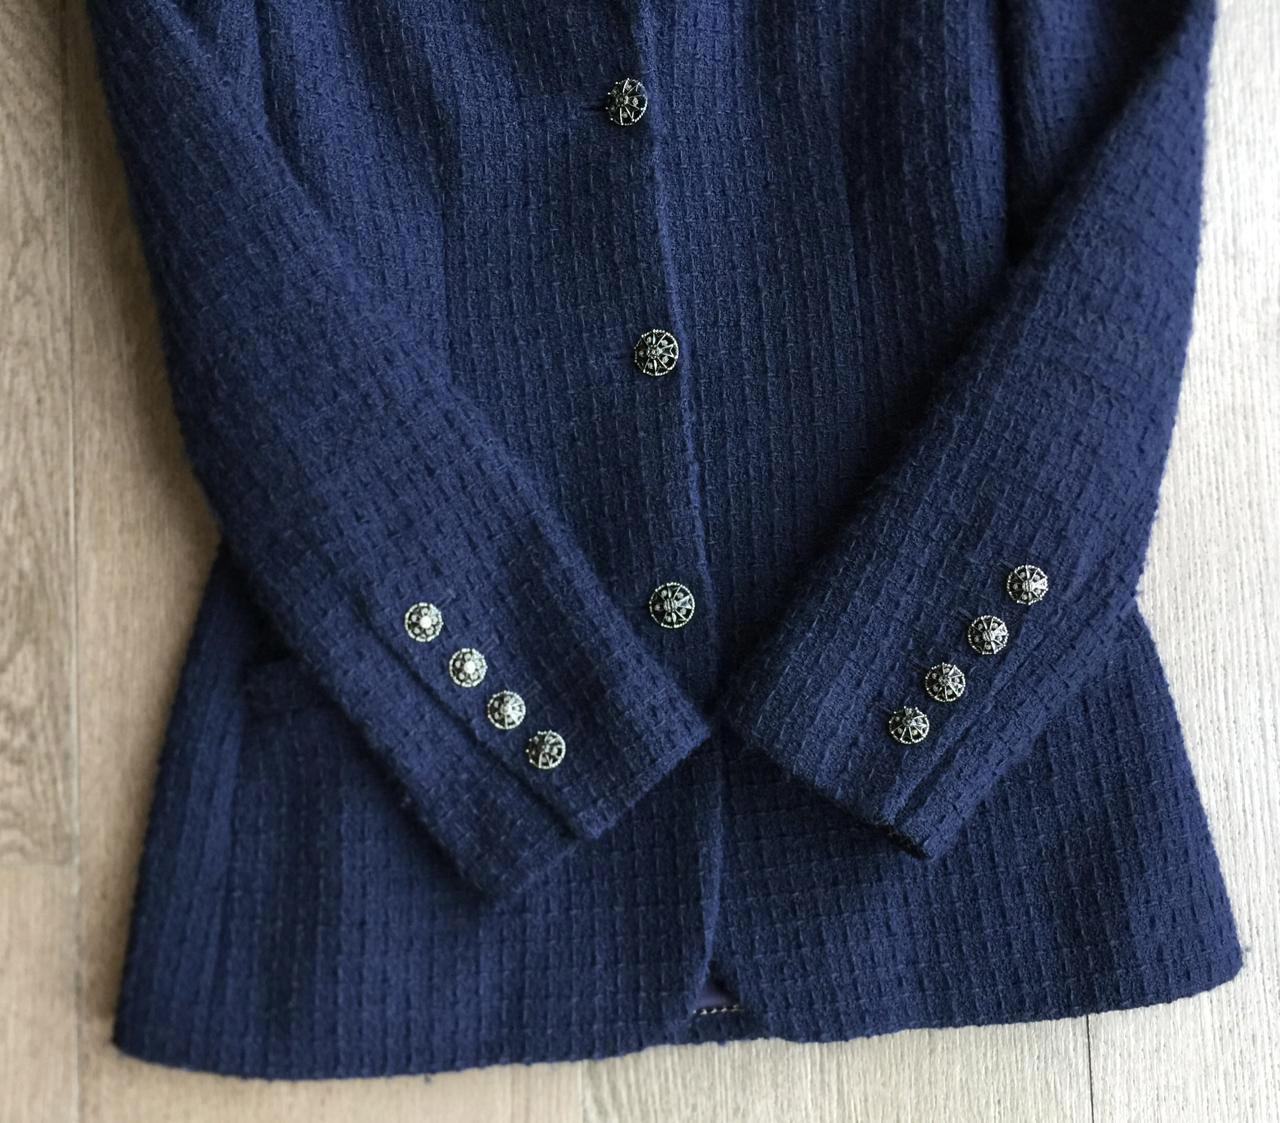 Fabulous Chanel navy tweed jacket with stunning CC jewel buttons.
Retail price over 8,600€
Same kind of tweed as seen on iconic Paris in Rome little black jacket.
Size mark 34 fr. Condition is pristine, no signs of wear - only tried once.